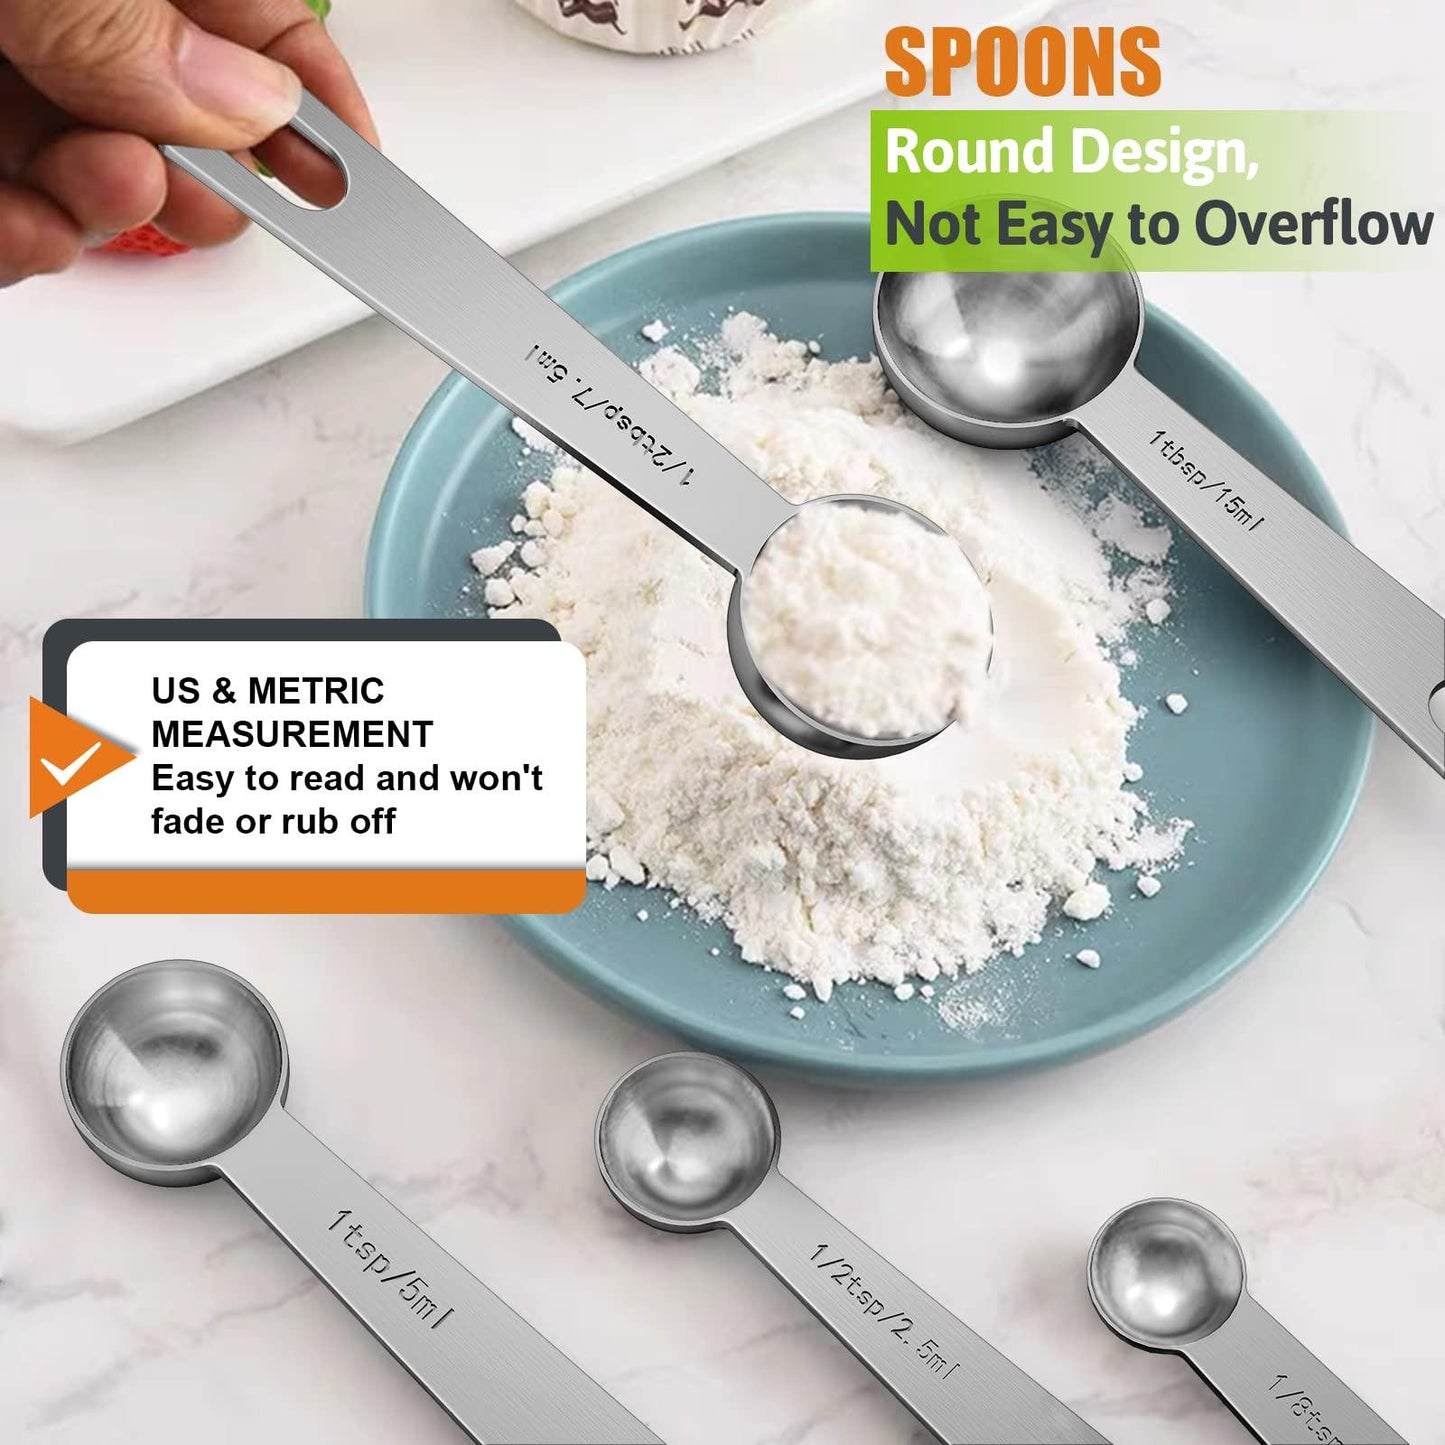 Paincco Stainless Steel Measuring Cups & Spoons Set of 21, Includes 7 Nesting Metal Measuring Cups, 9 Measuring Spoons and 5 Mini Measuring Spoons, Kitchen Gadgets for Cooking & Baking - CookCave